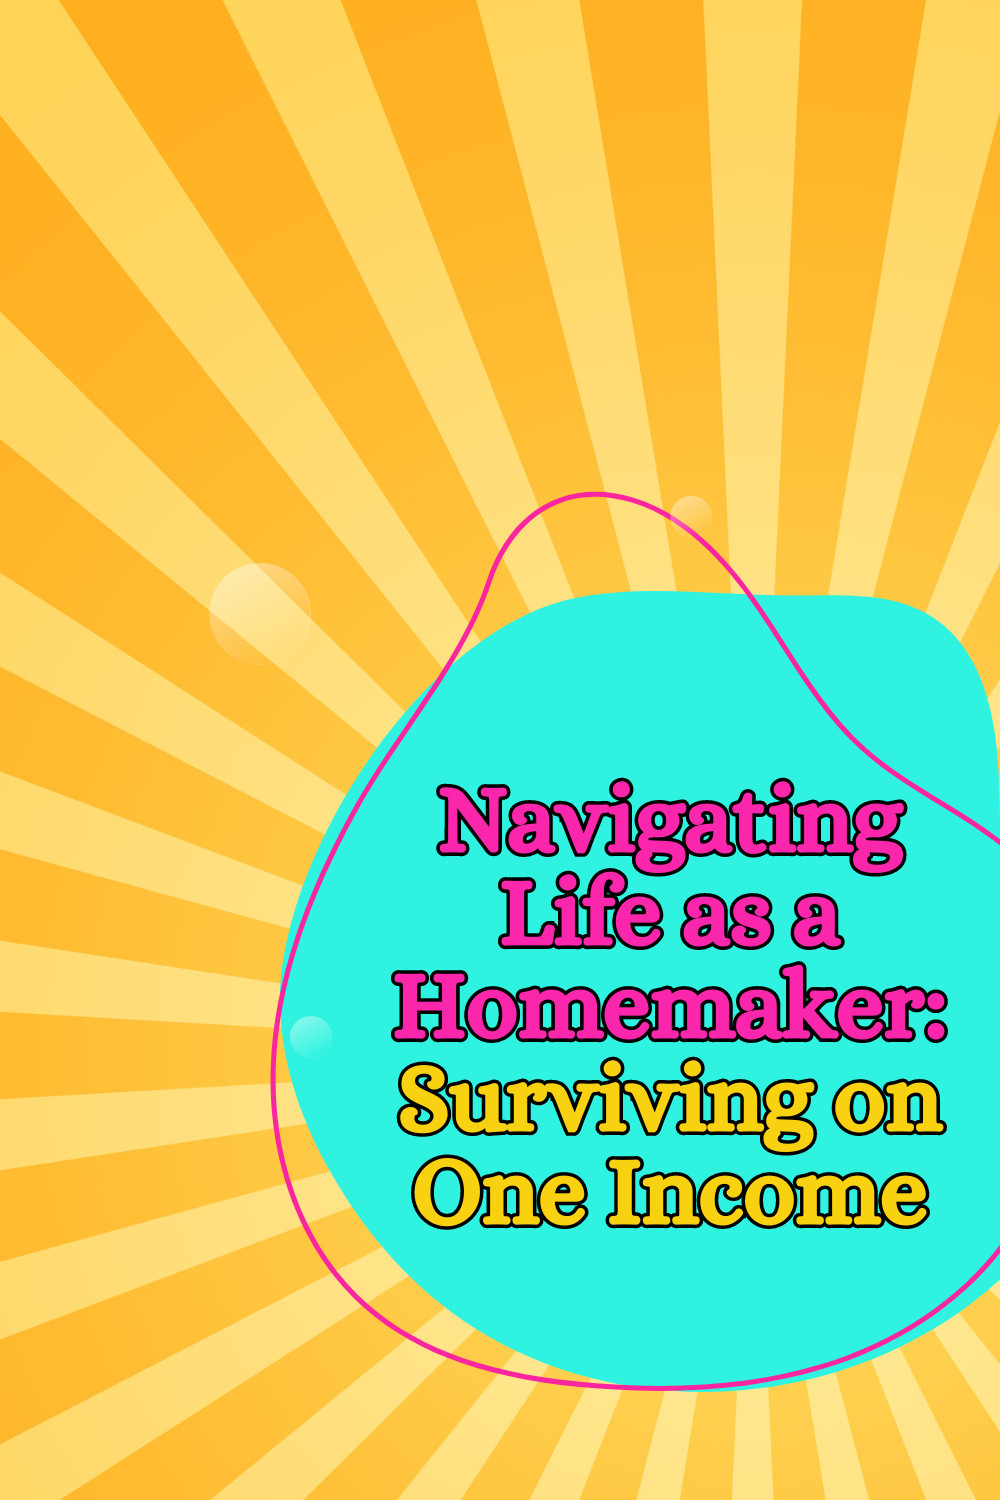 Navigating Life as a Homemaker: Surviving on One Income